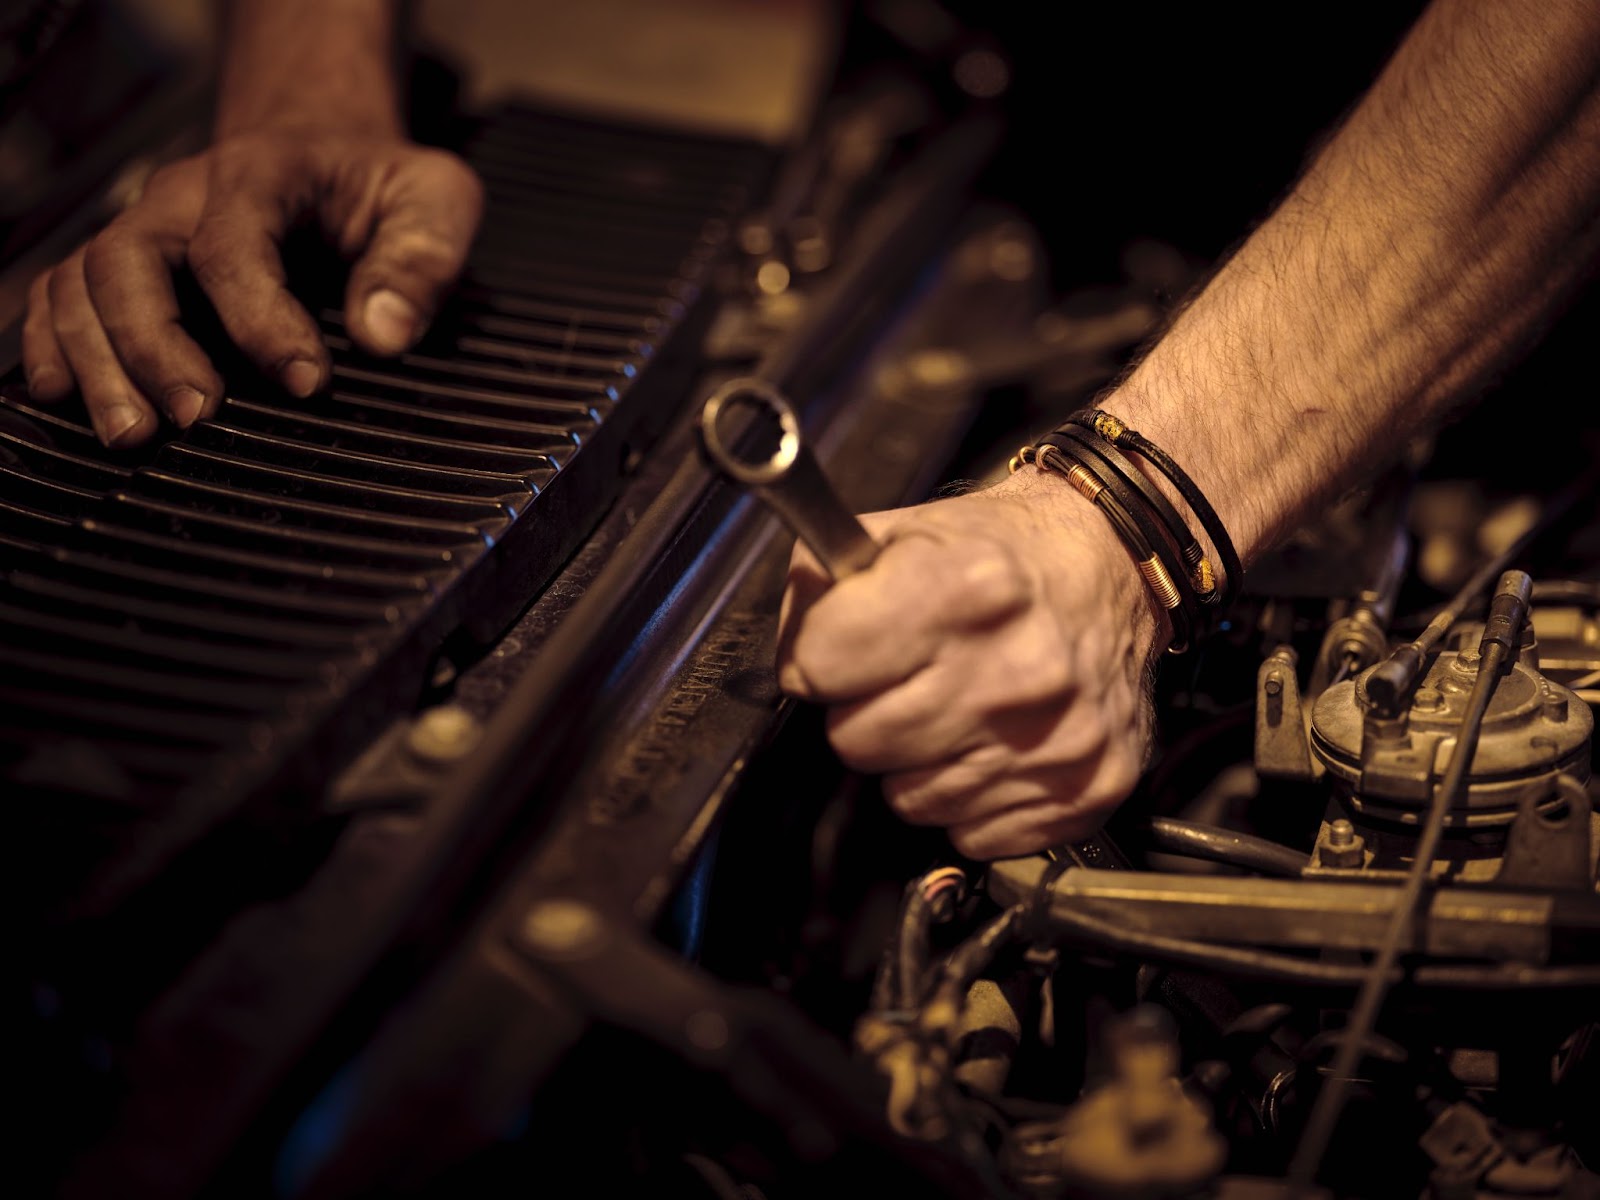 Unmatched Auto Repair Services in Pittsburgh: Your Trusted Guide